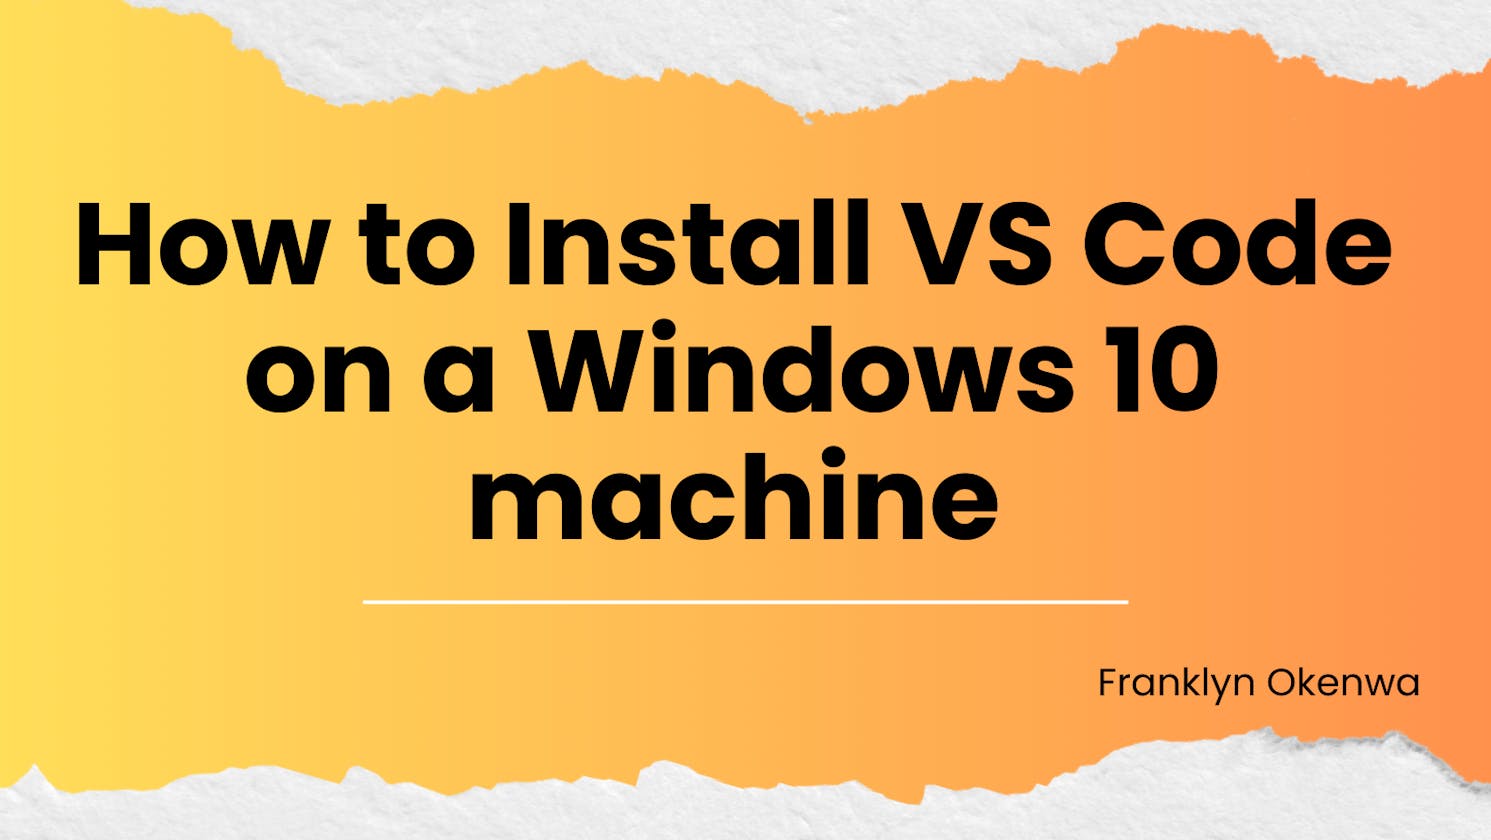 How to Install VS Code on a Windows 10 machine